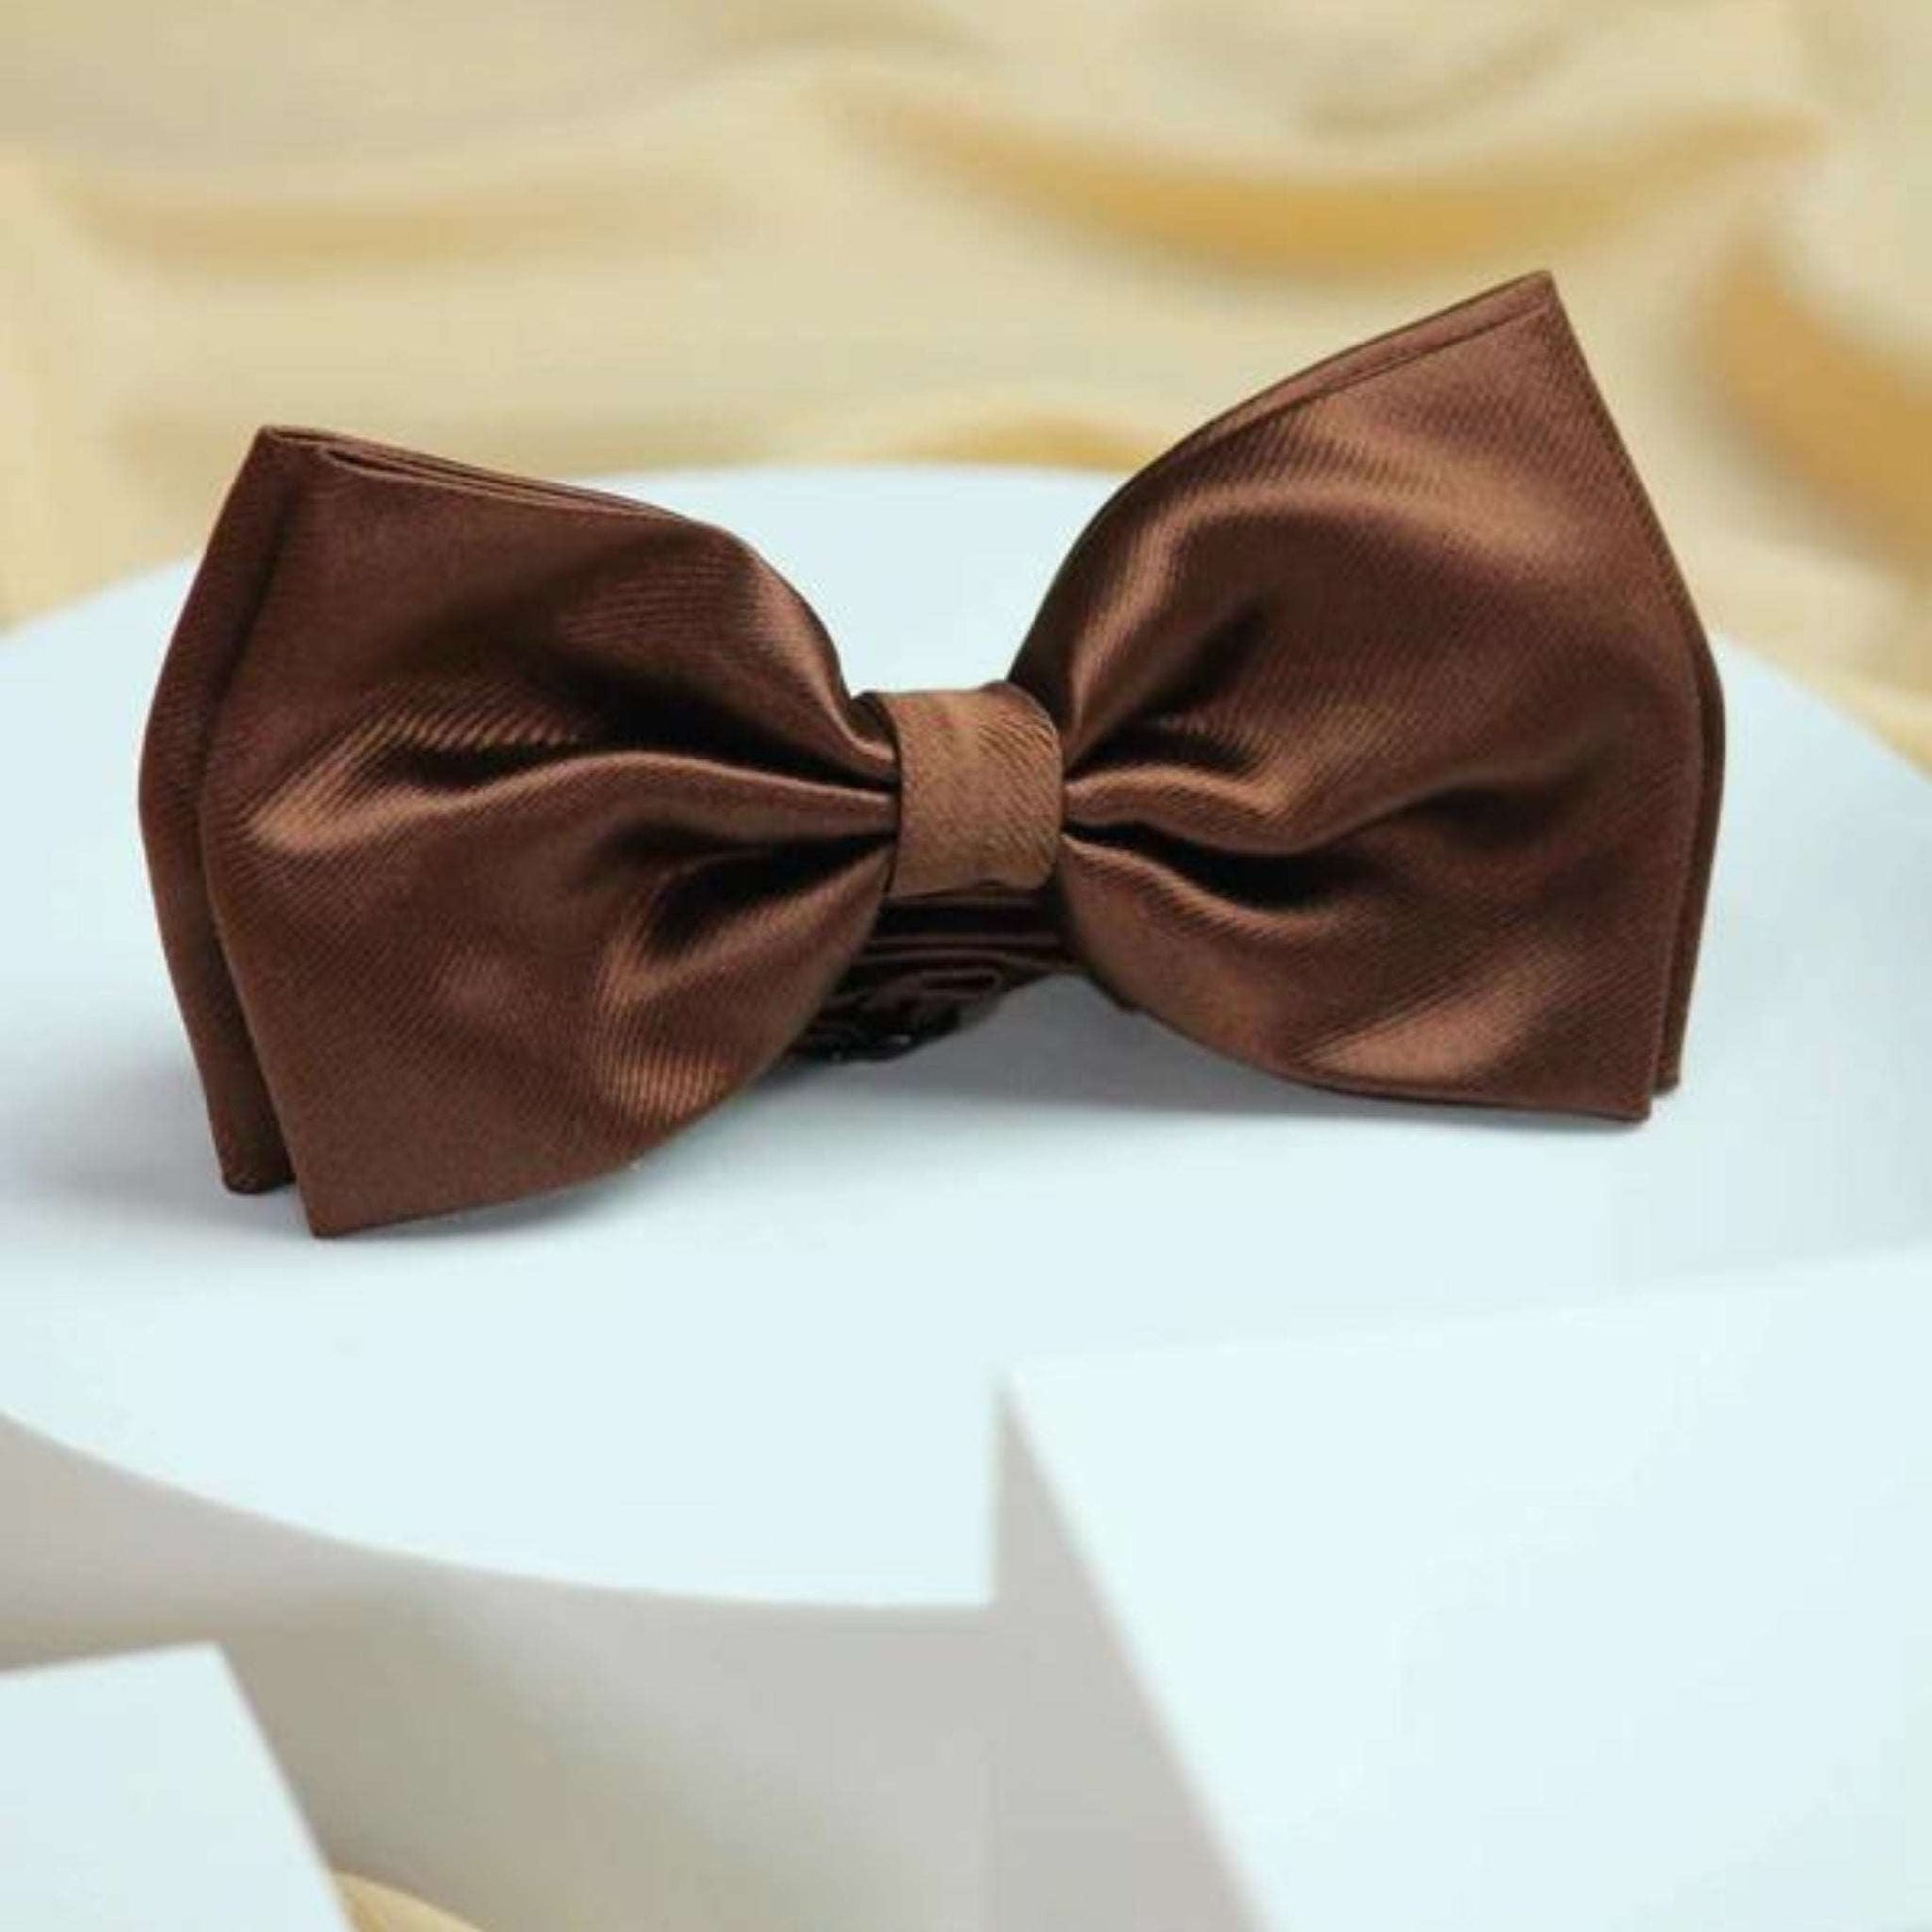 YOUTH ROBE's Tuxedo Bow-Tie (Brown) - YOUTH ROBE